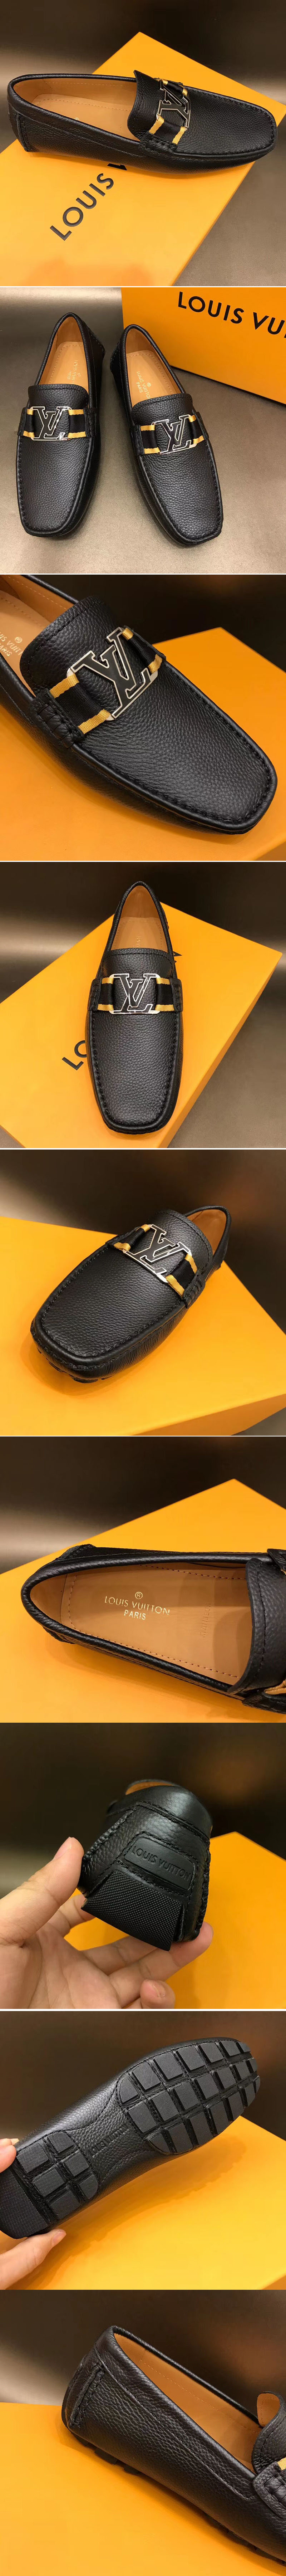 Replica Louis Vuitton LV Monte Carlo Moccasin Shoes Black and Yellow Calf Leather